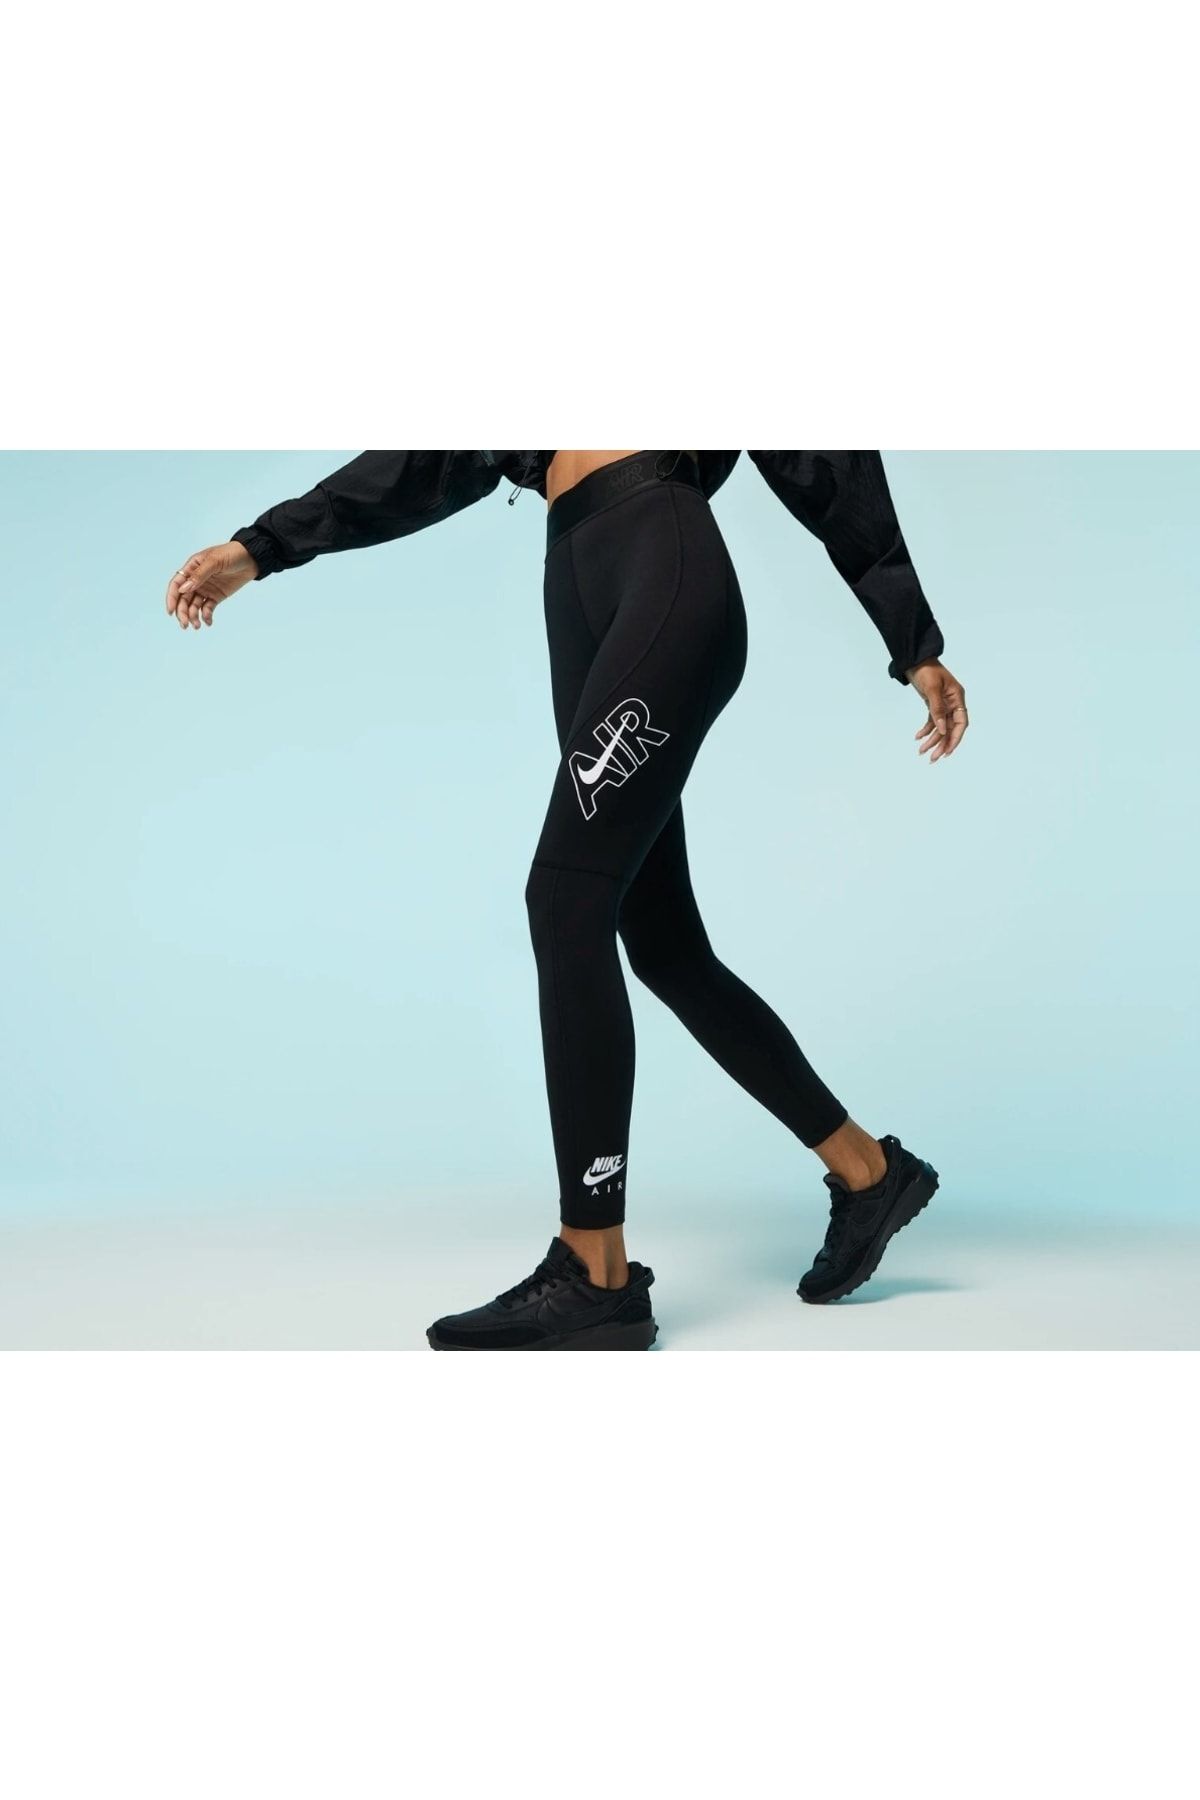 Nike Nsw Favorites Air 1 Girls' Tights, Girls, AQ9176, Black/Metallic Gold,  XL: Buy Online at Best Price in Egypt - Souq is now